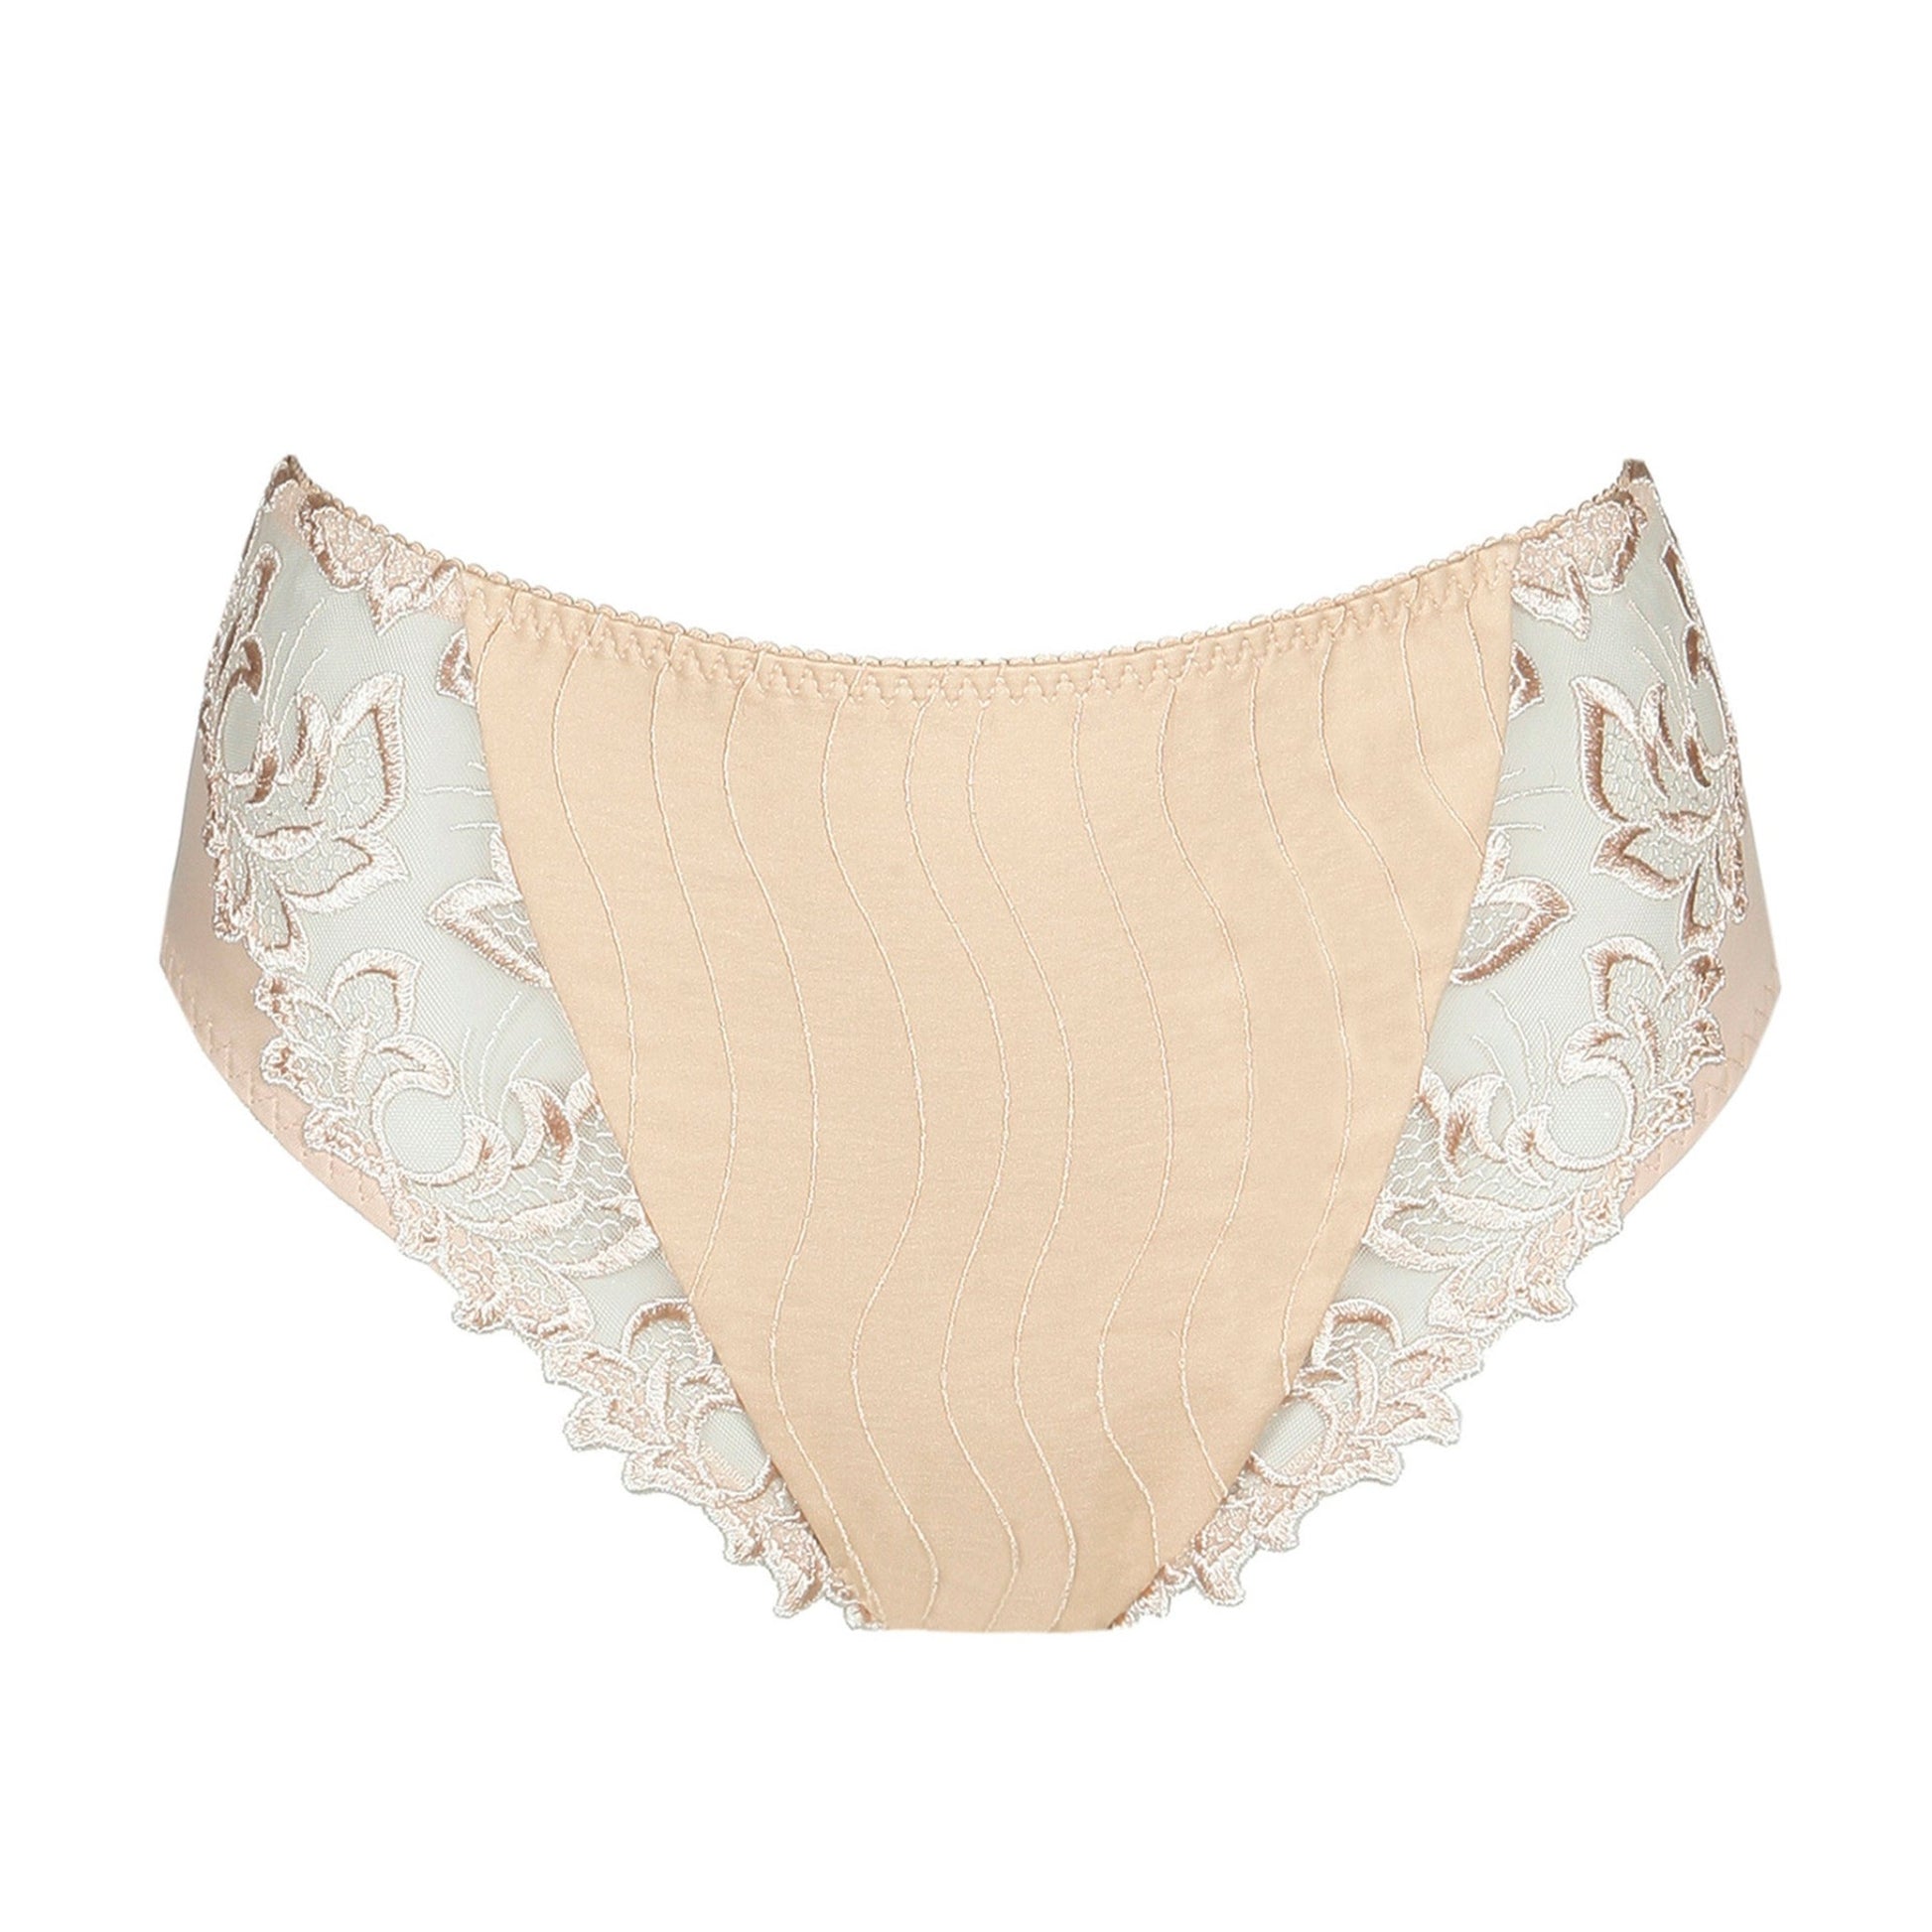 Deauville high-waisted full brief with luxurious lace in Caffe Latte by Primadonna.